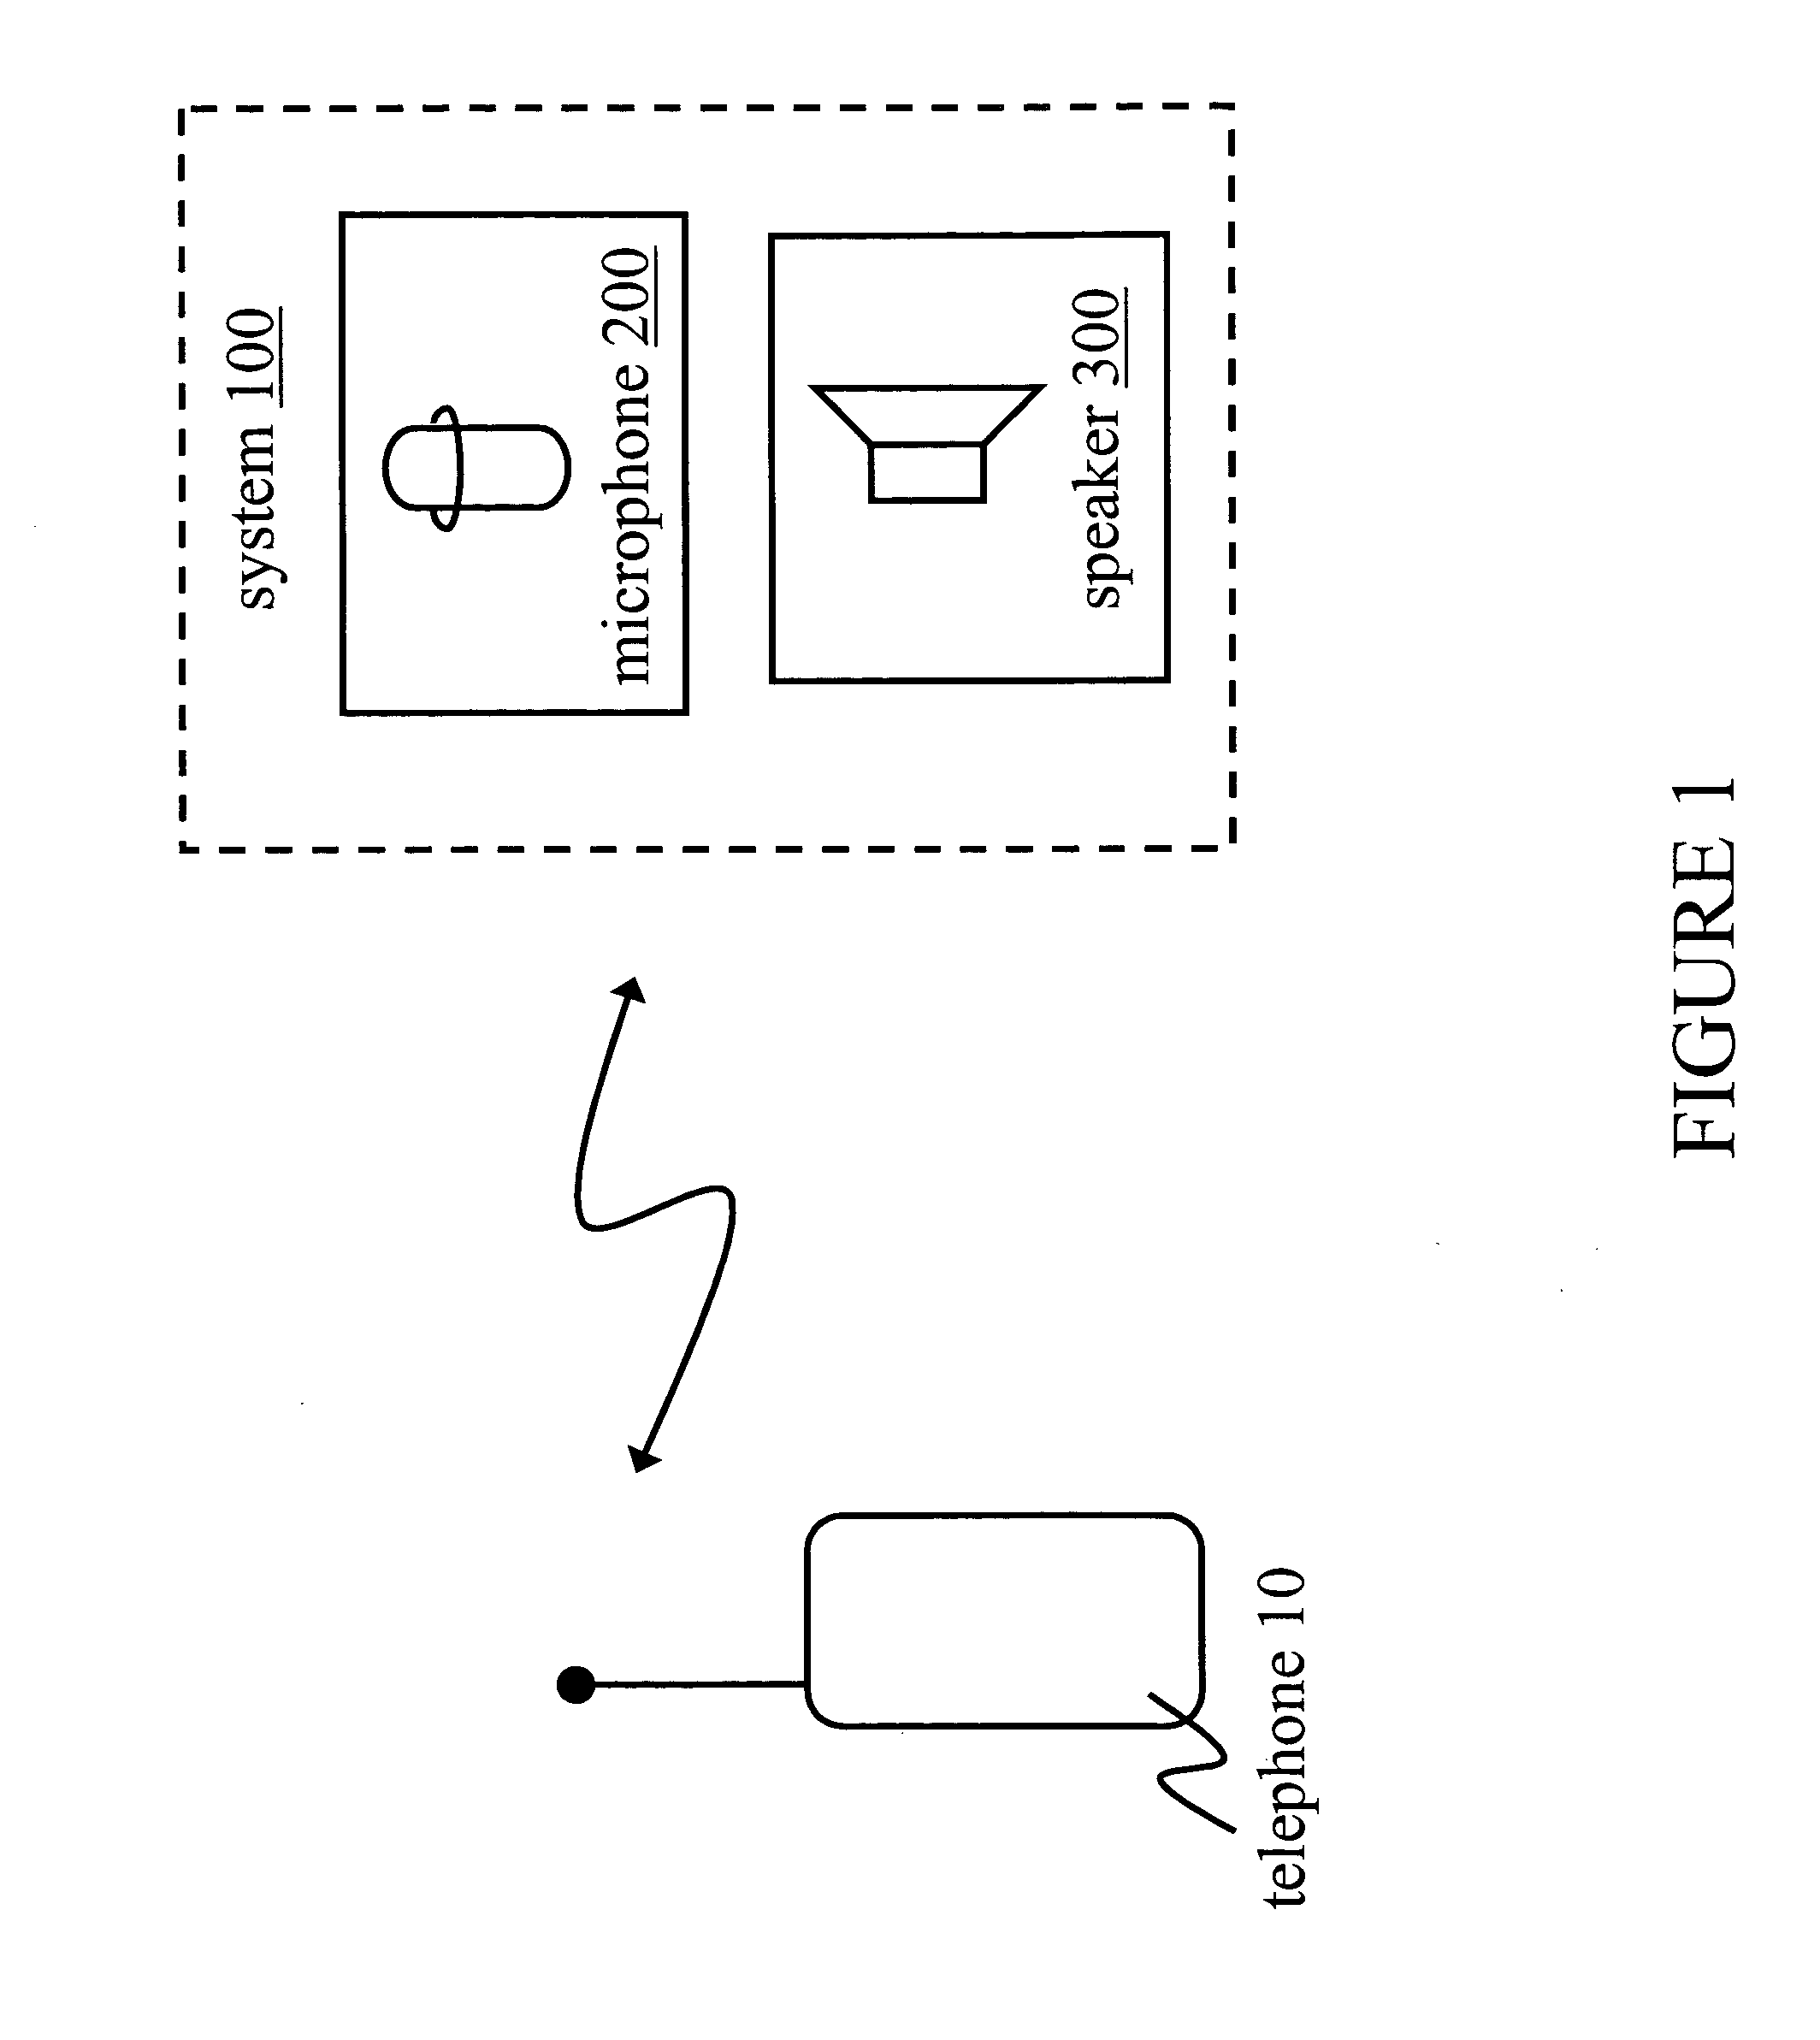 Audio communications system including wireless microphone and wireless speaker